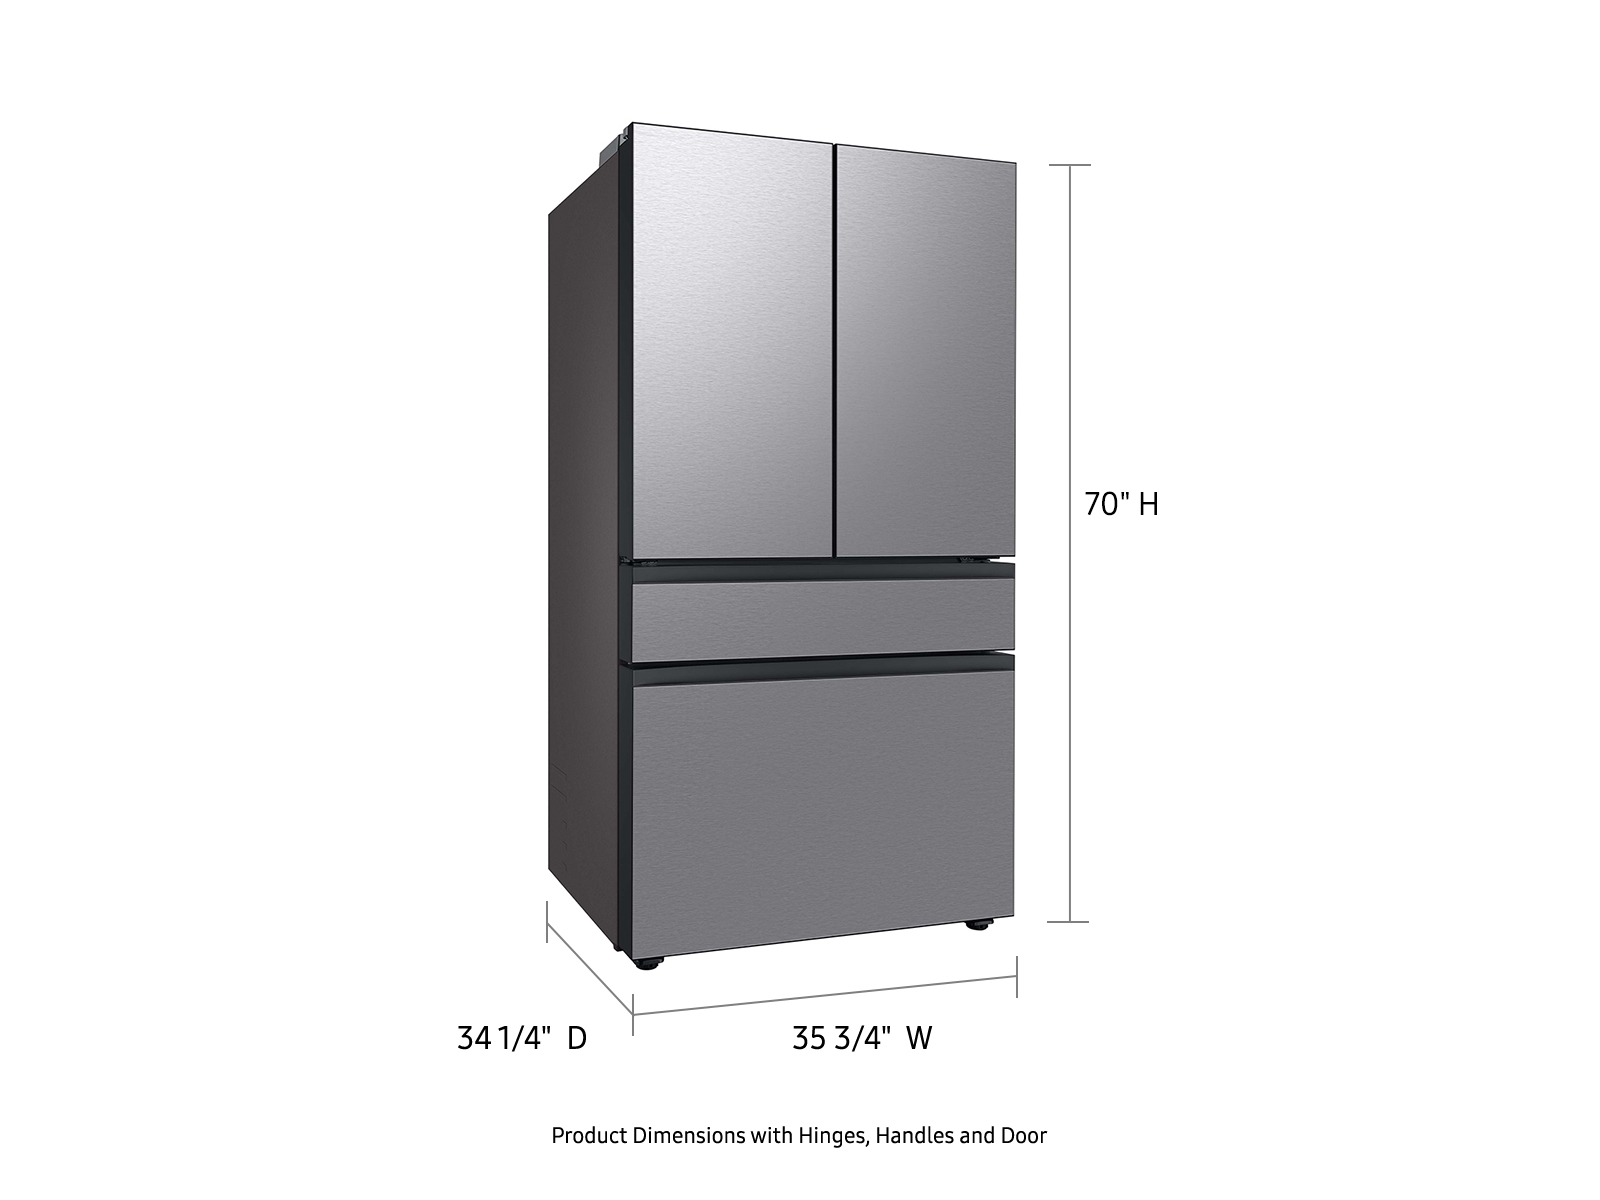 Simplify Your Life with the Samsung Bespoke Convertible Side by Side  Refrigerator 